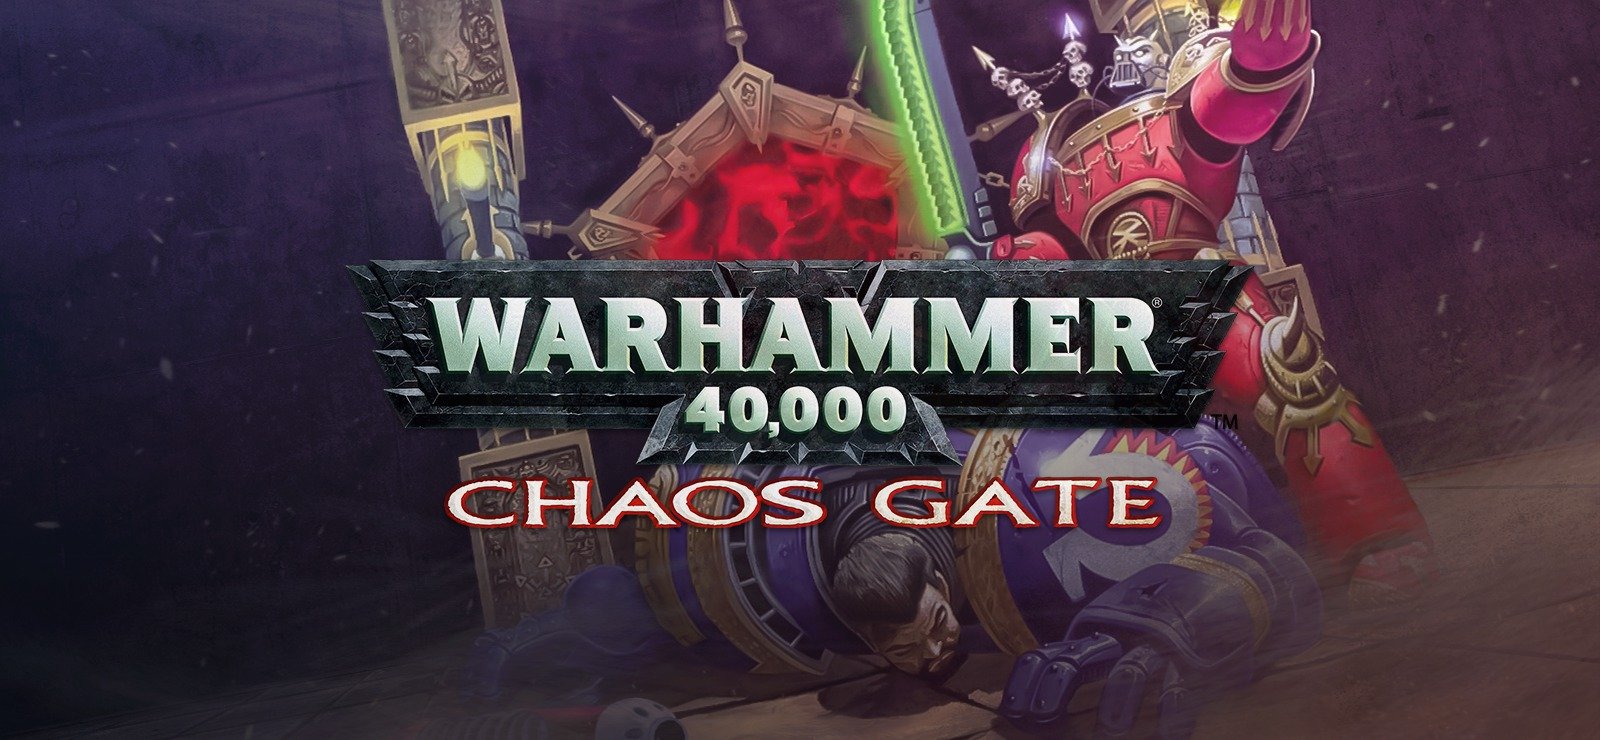 free Warhammer 40,000: Chaos Gate - Daemonhunters for iphone download